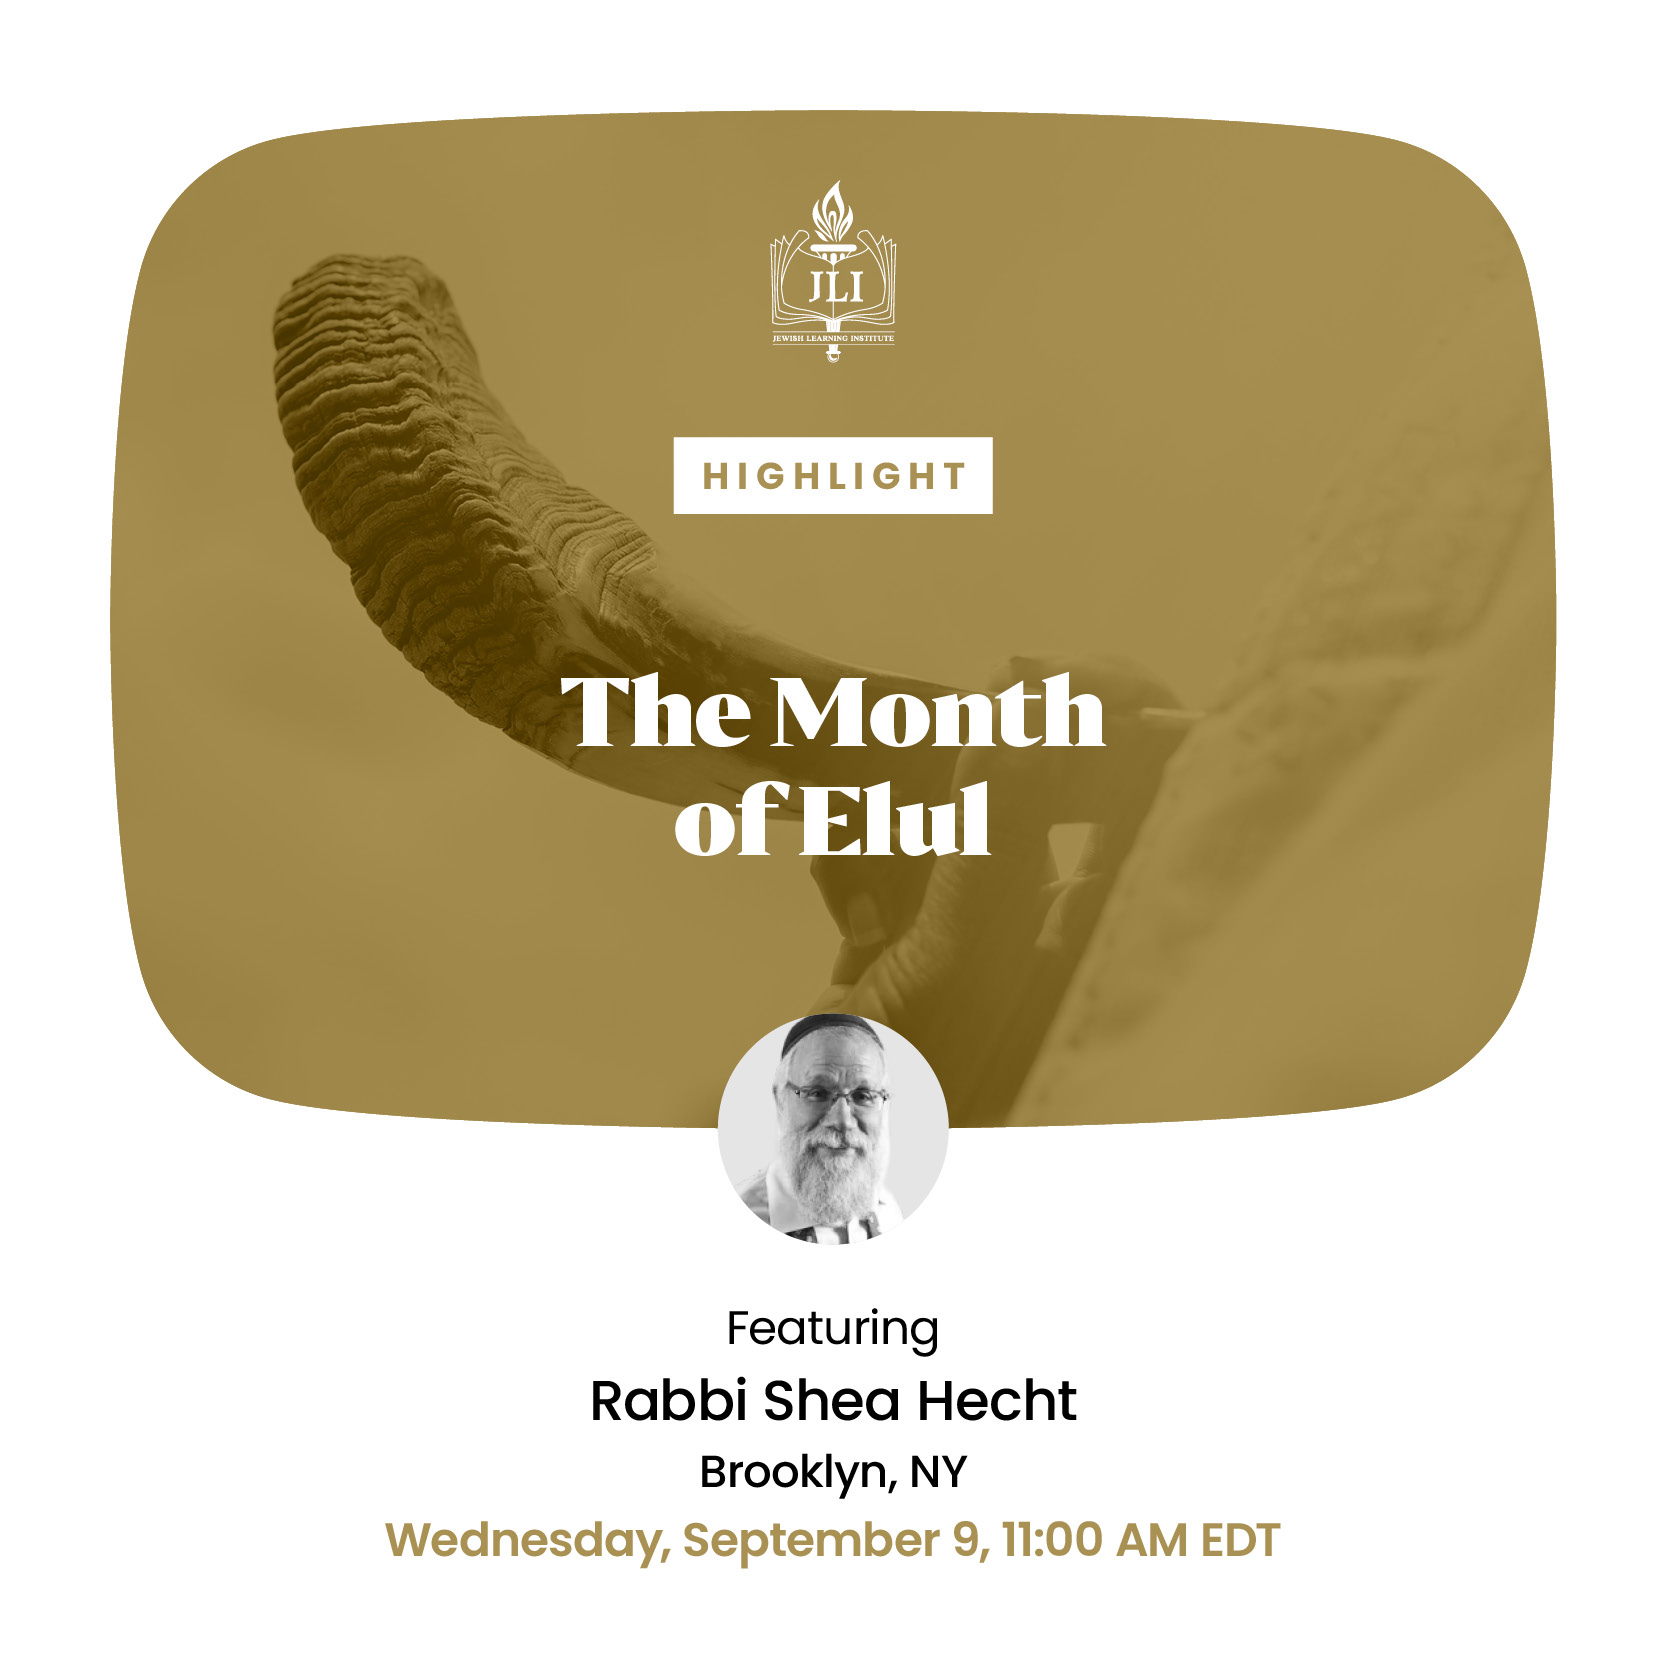 The month of Elul